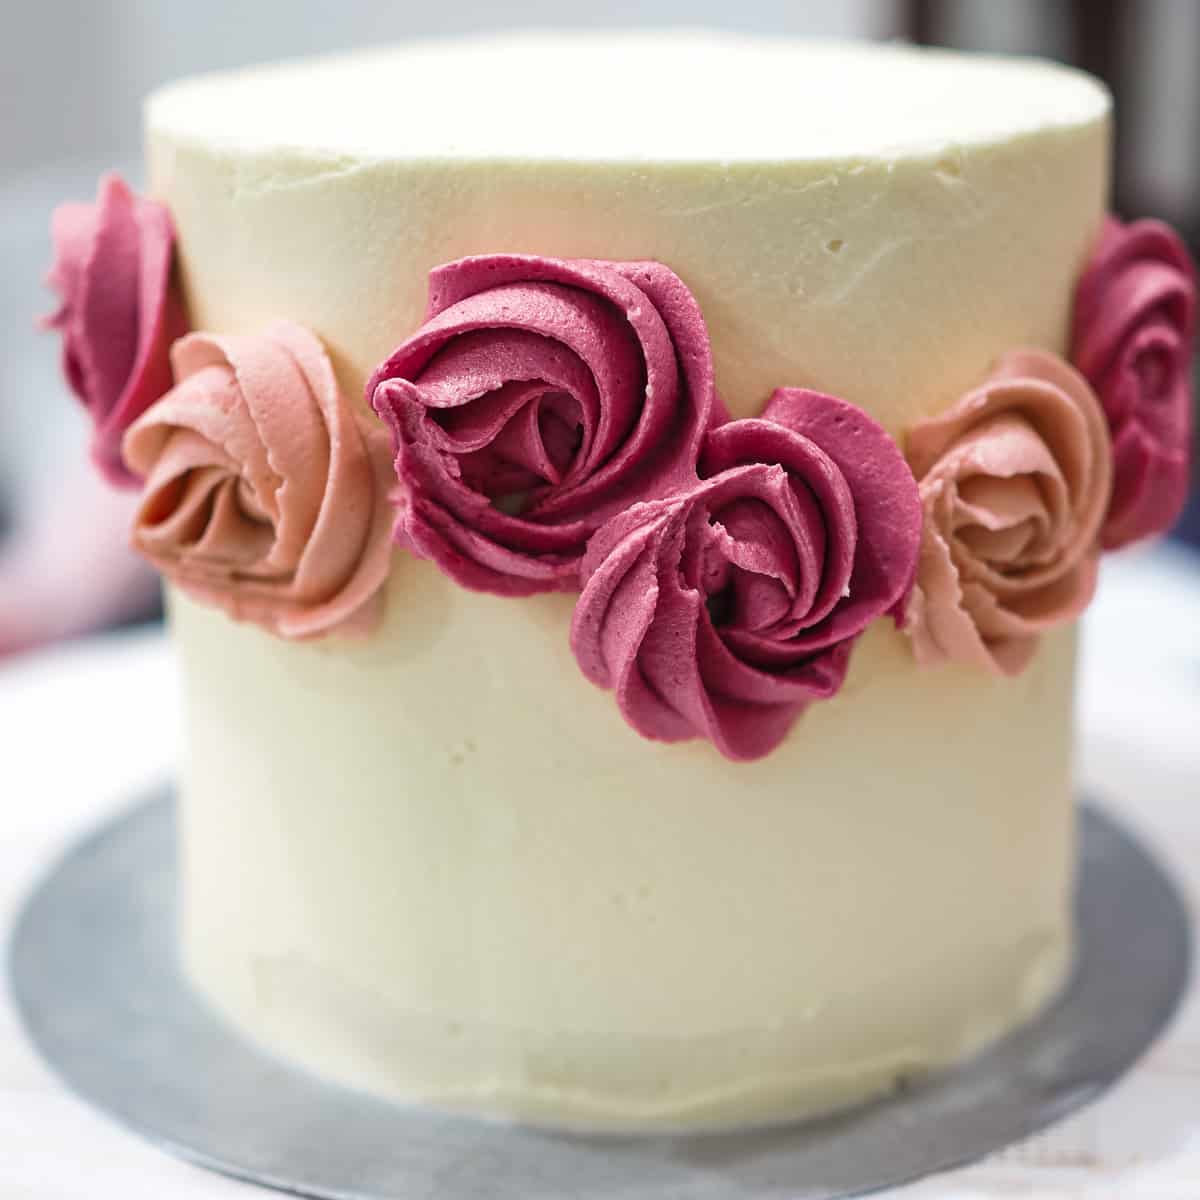 Buttercream rosettes in burgundy and pink on the sides of a round buttercream cake